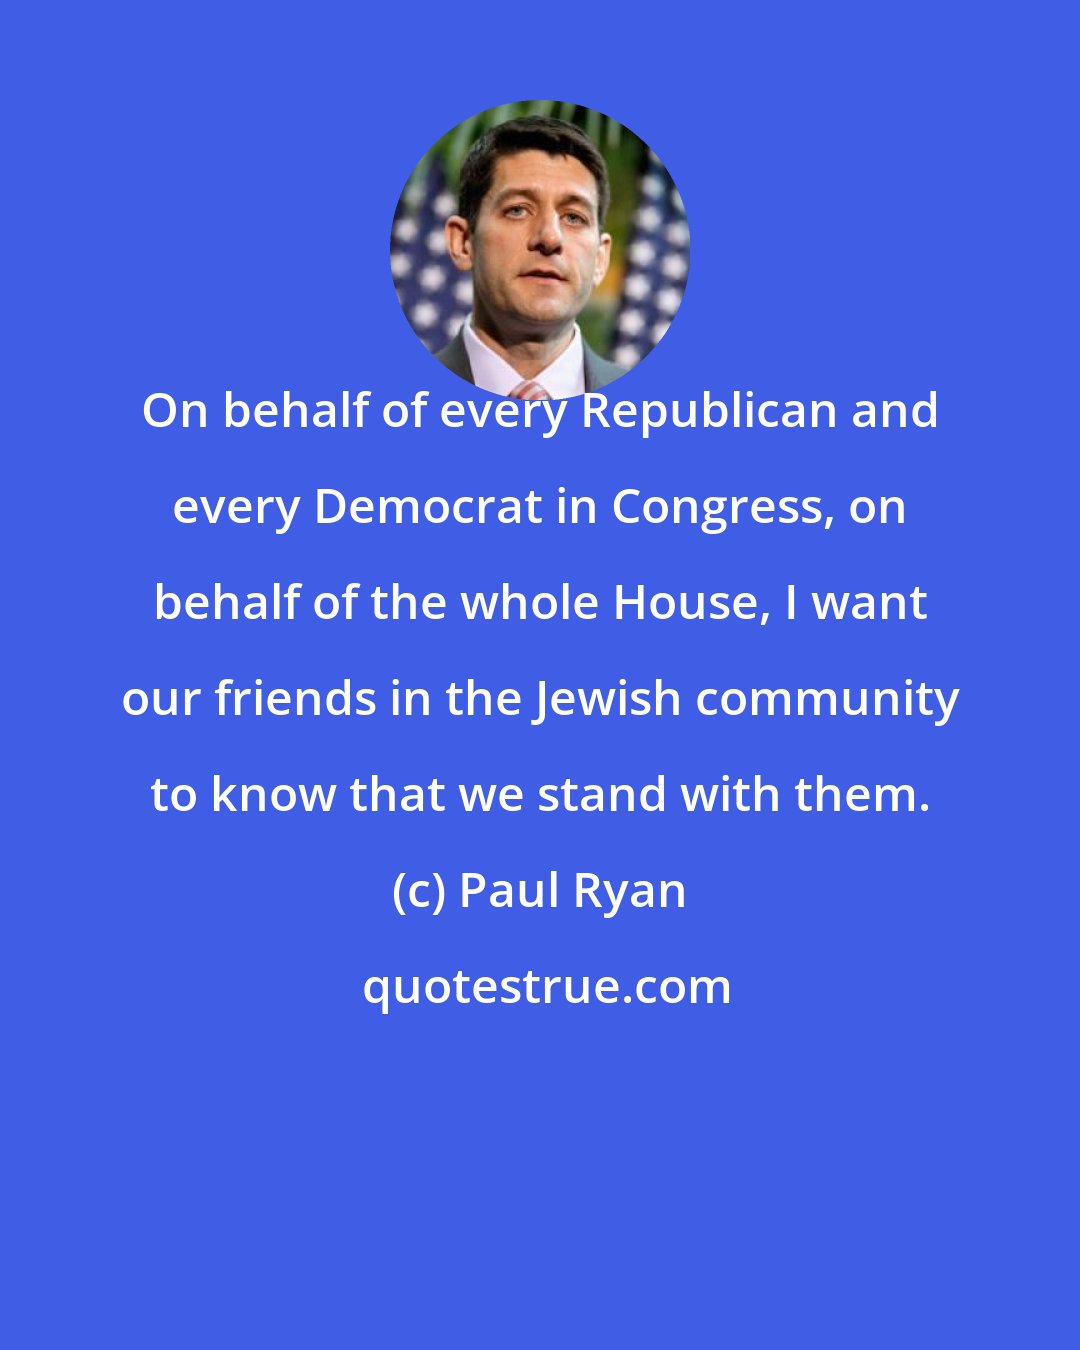 Paul Ryan: On behalf of every Republican and every Democrat in Congress, on behalf of the whole House, I want our friends in the Jewish community to know that we stand with them.